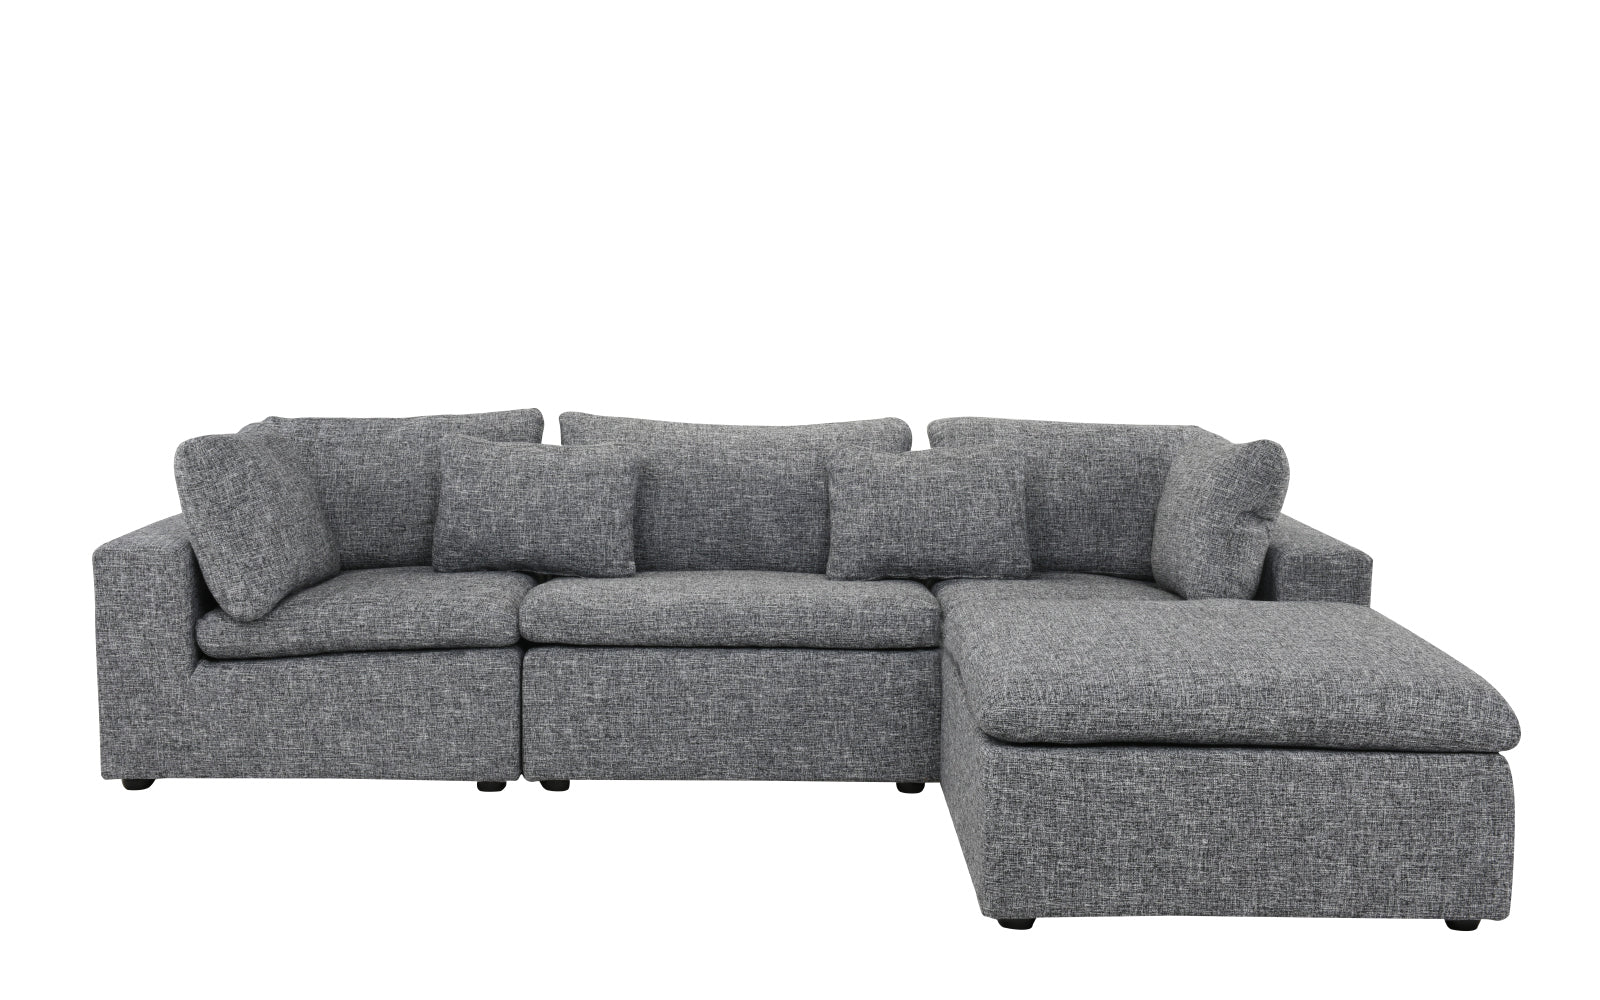 EXP302-LGR Delano Modern Low Profile Sectional Sofa with Chai sku EXP302-LGR